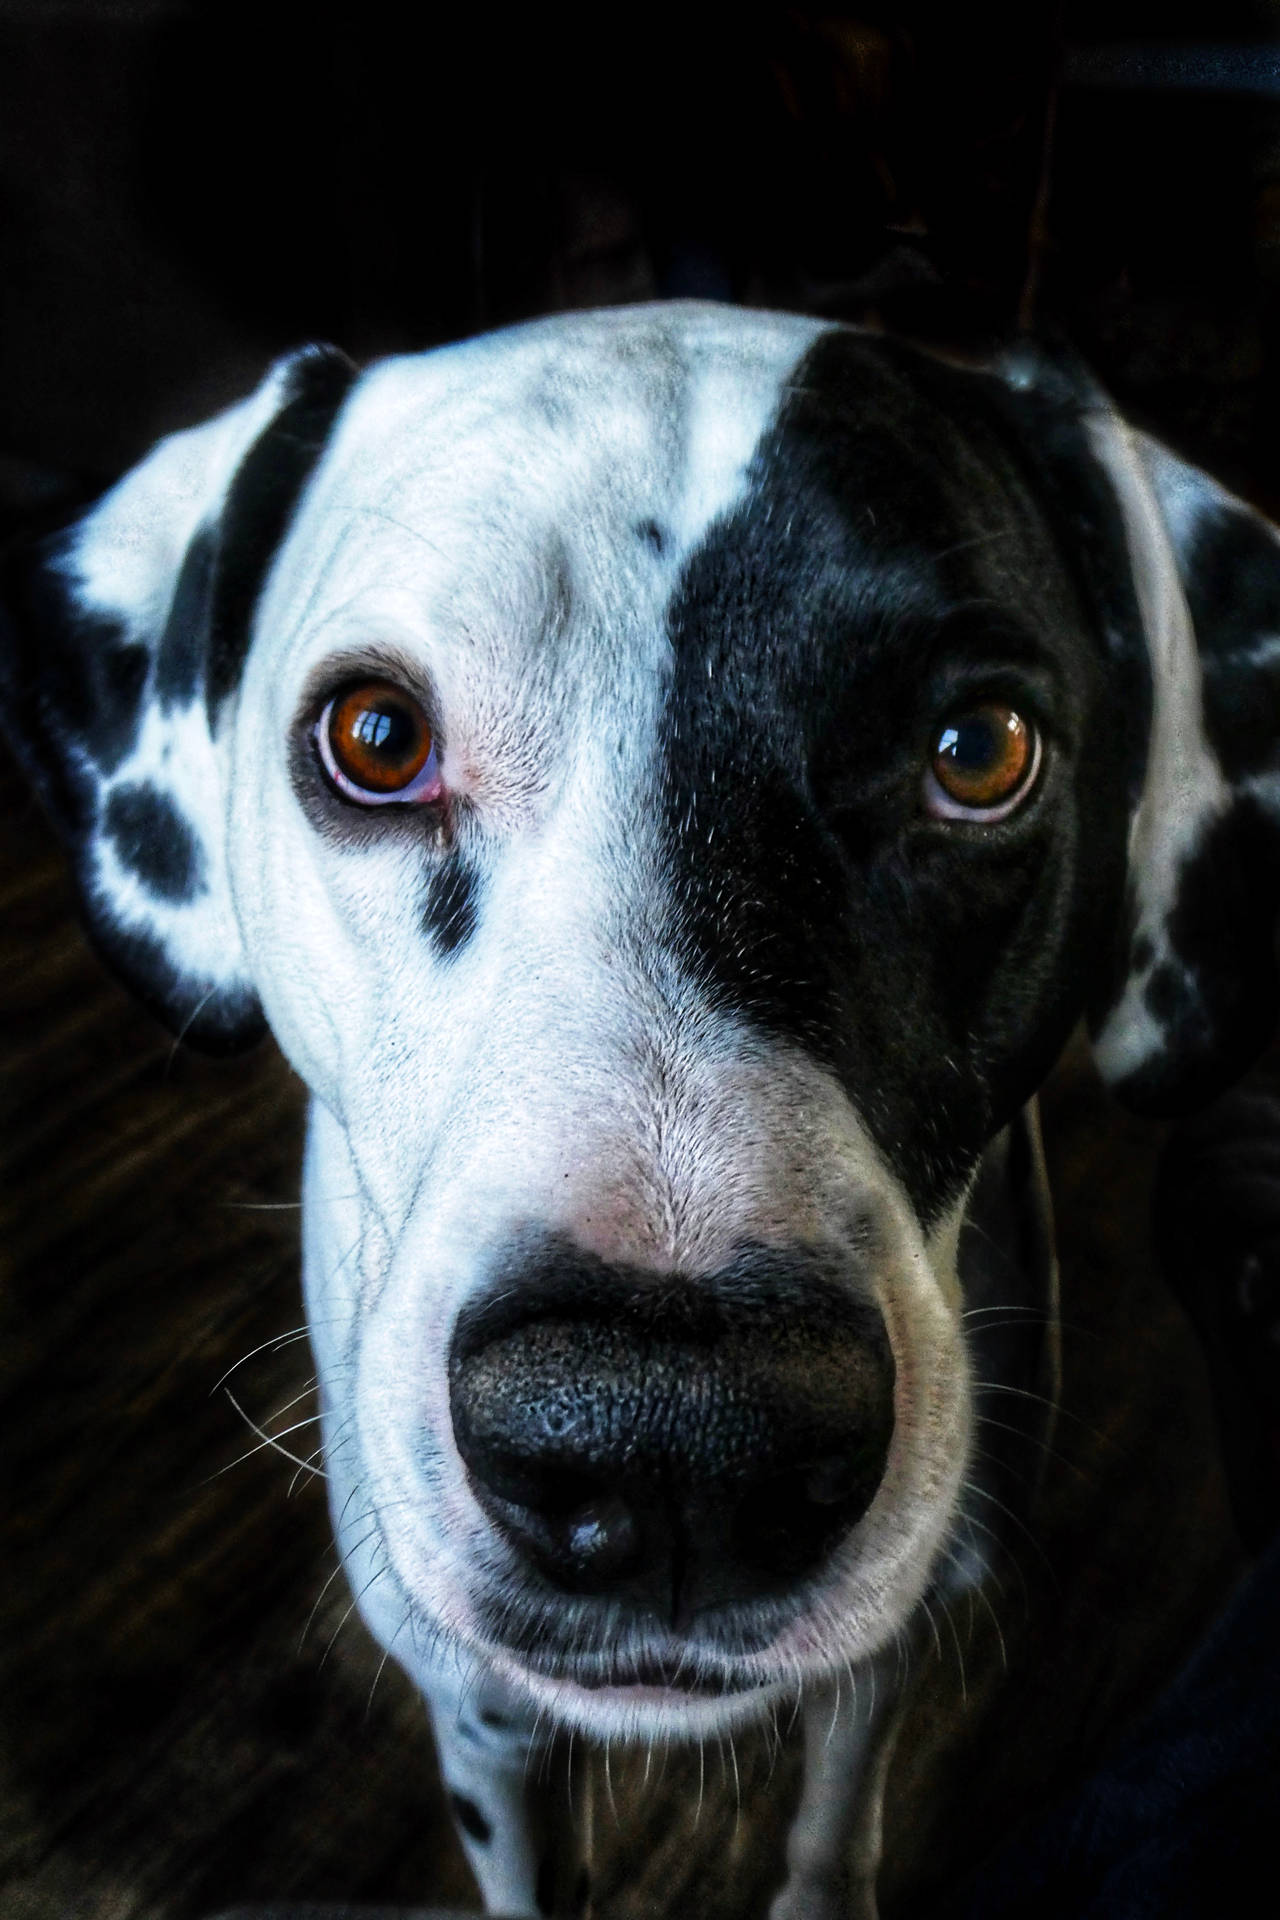 Dalmatian dog marked with black spots close-up wallpaper.